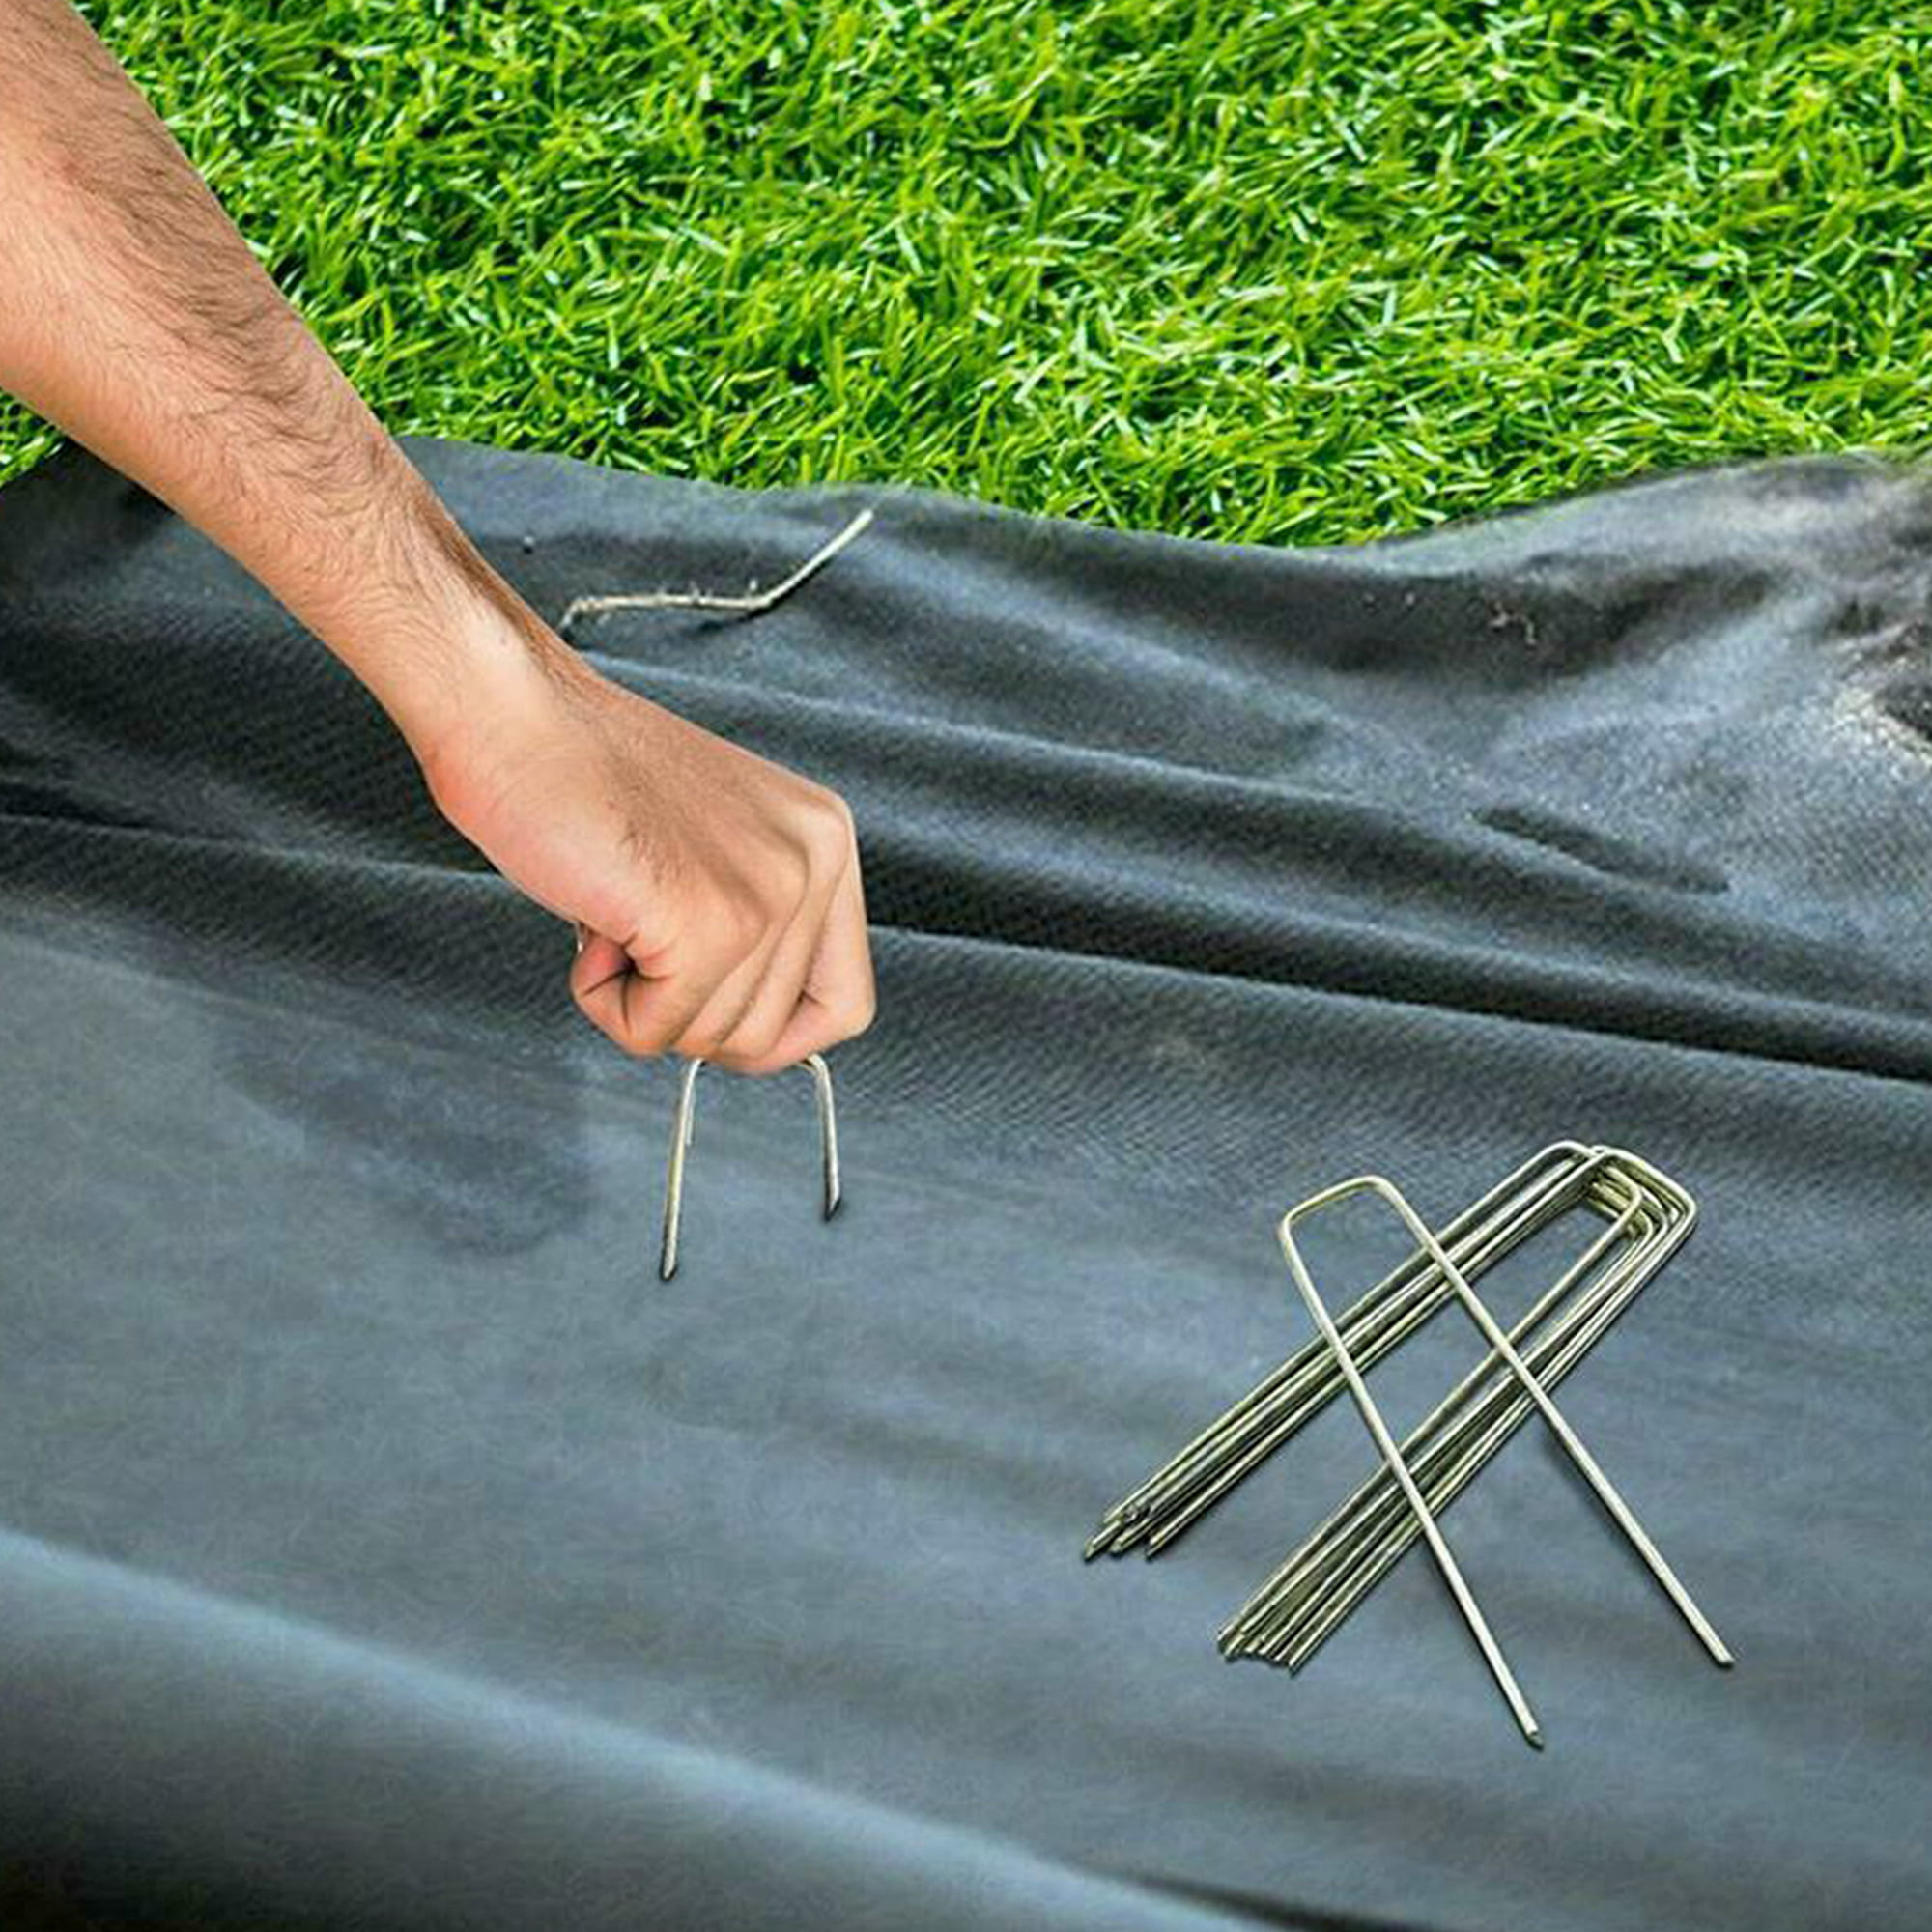 WEED MAT STAPLES MULCH MAT SECURE PINS GROUNDSHEET GROUNDCOVER PEGS WEED CONTROL 